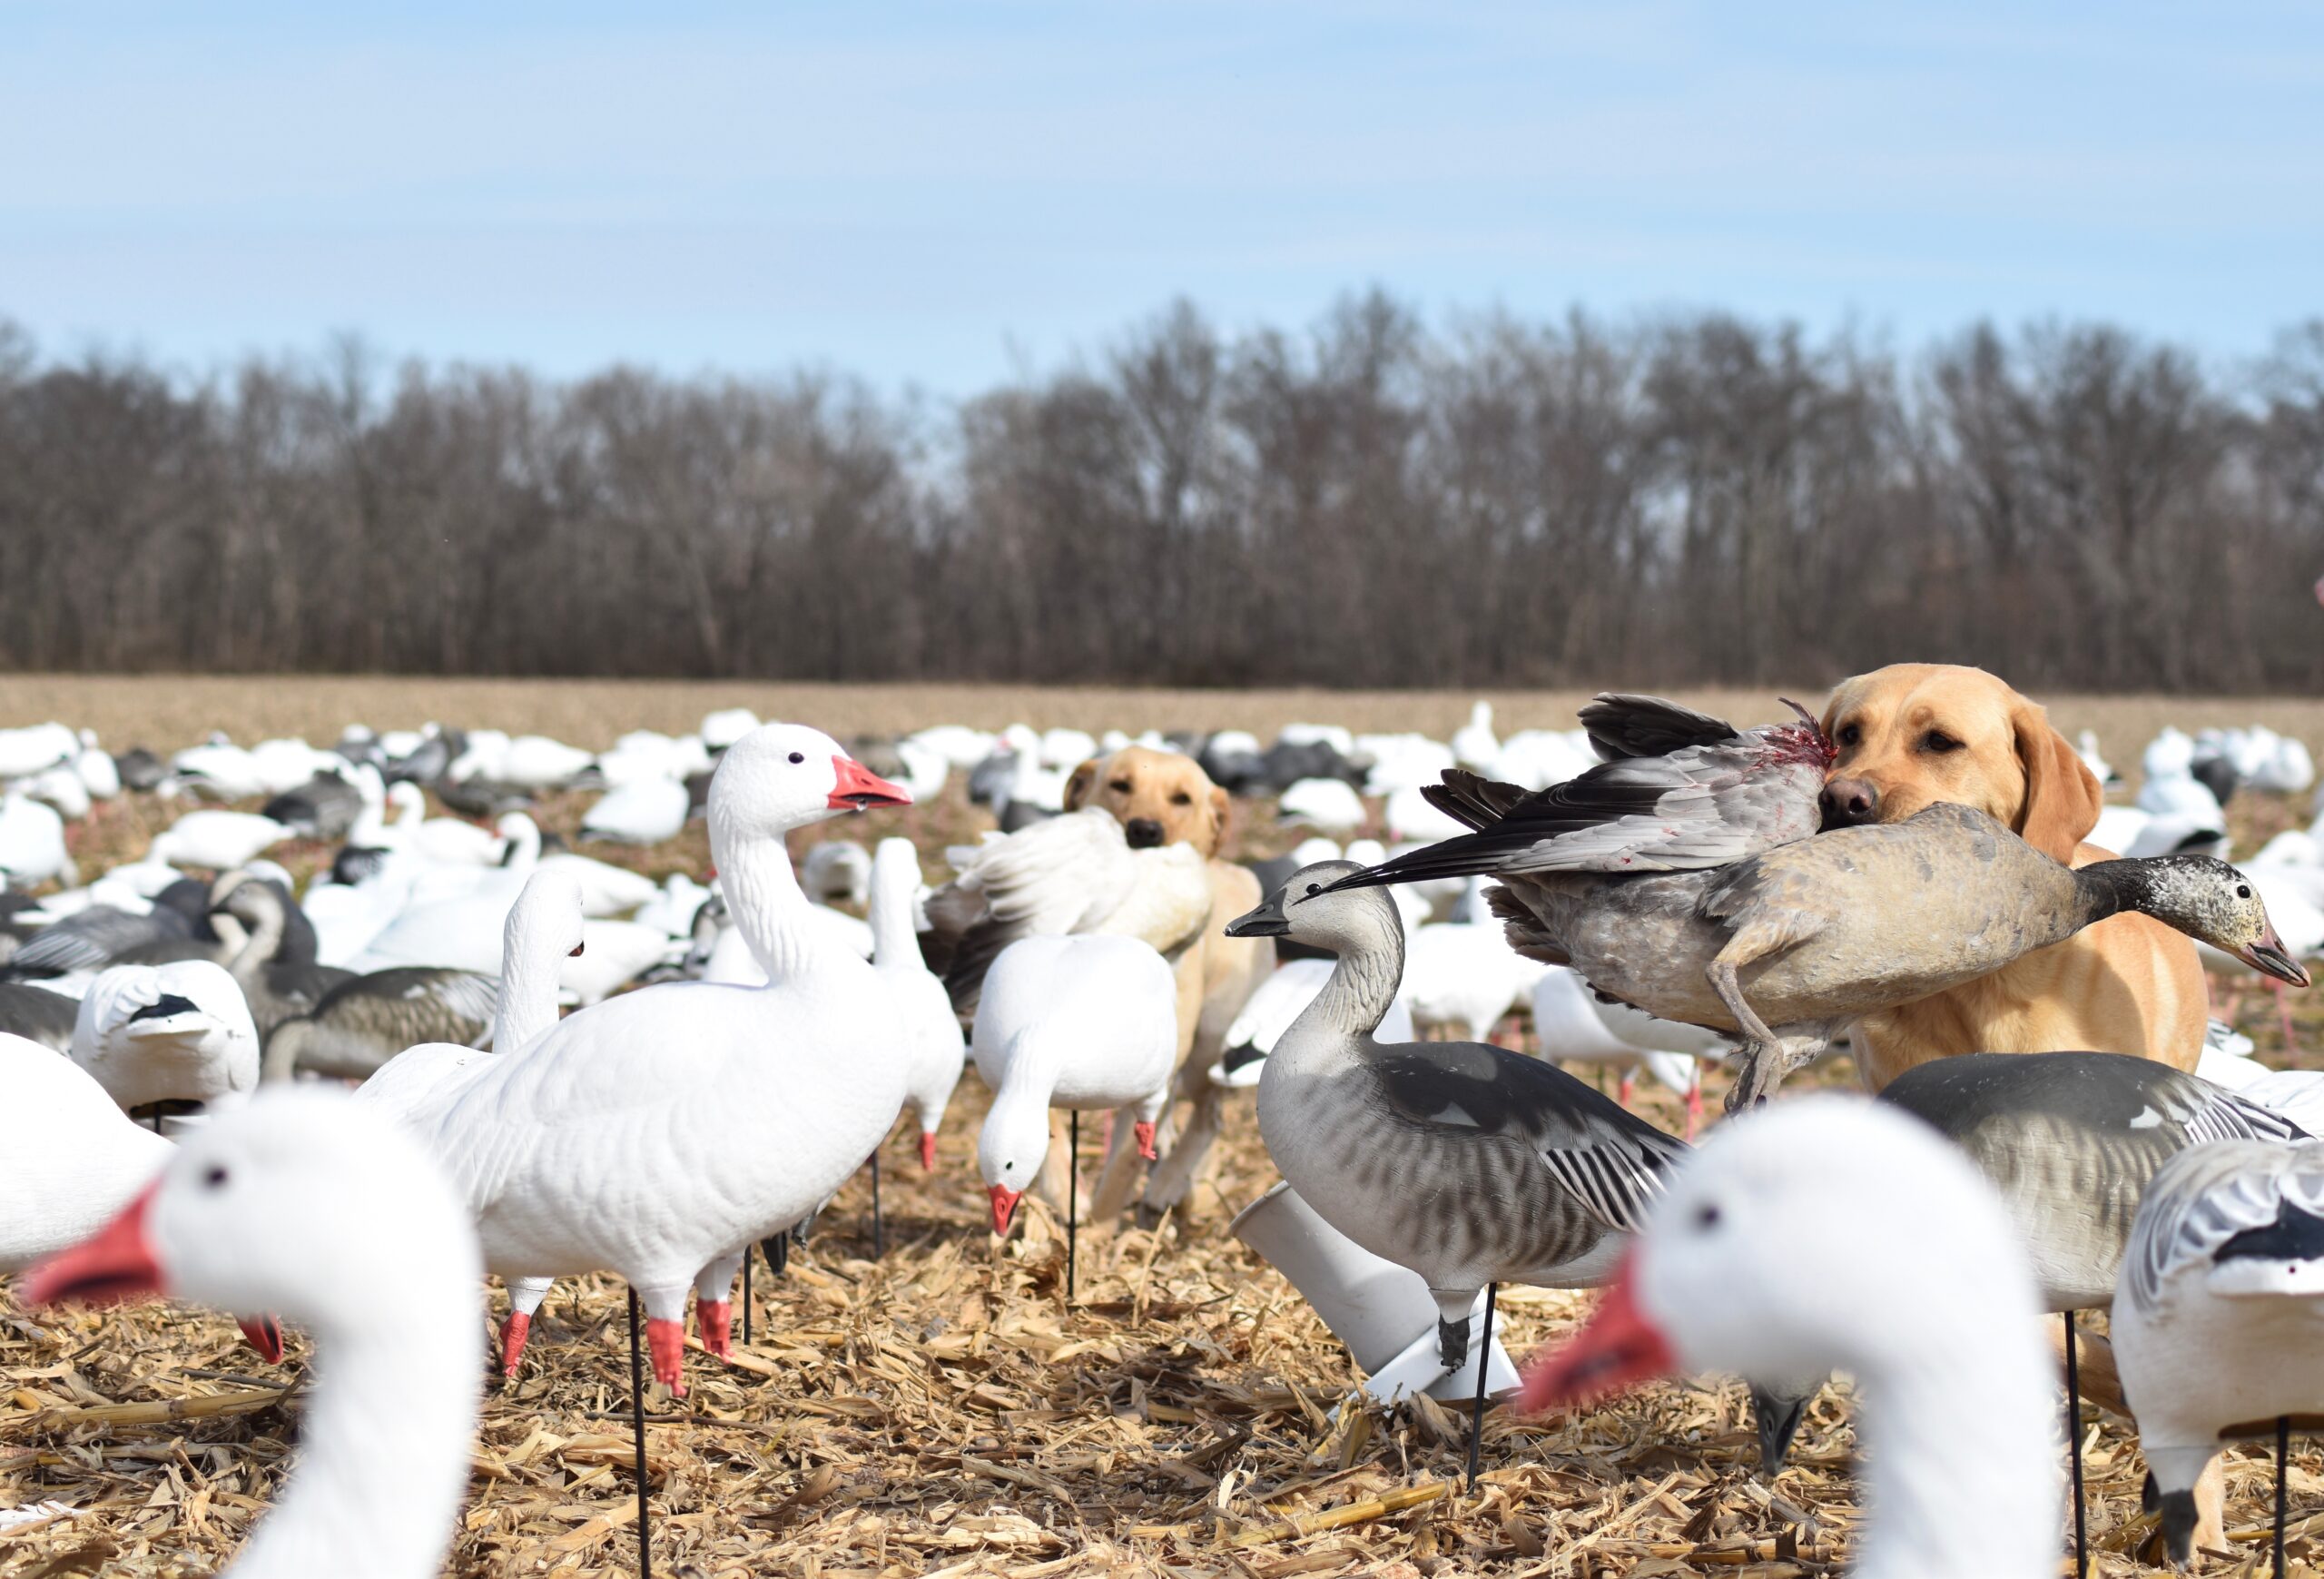 Waterfowl managers though hunters would have more of an impact on snow goose numbers.